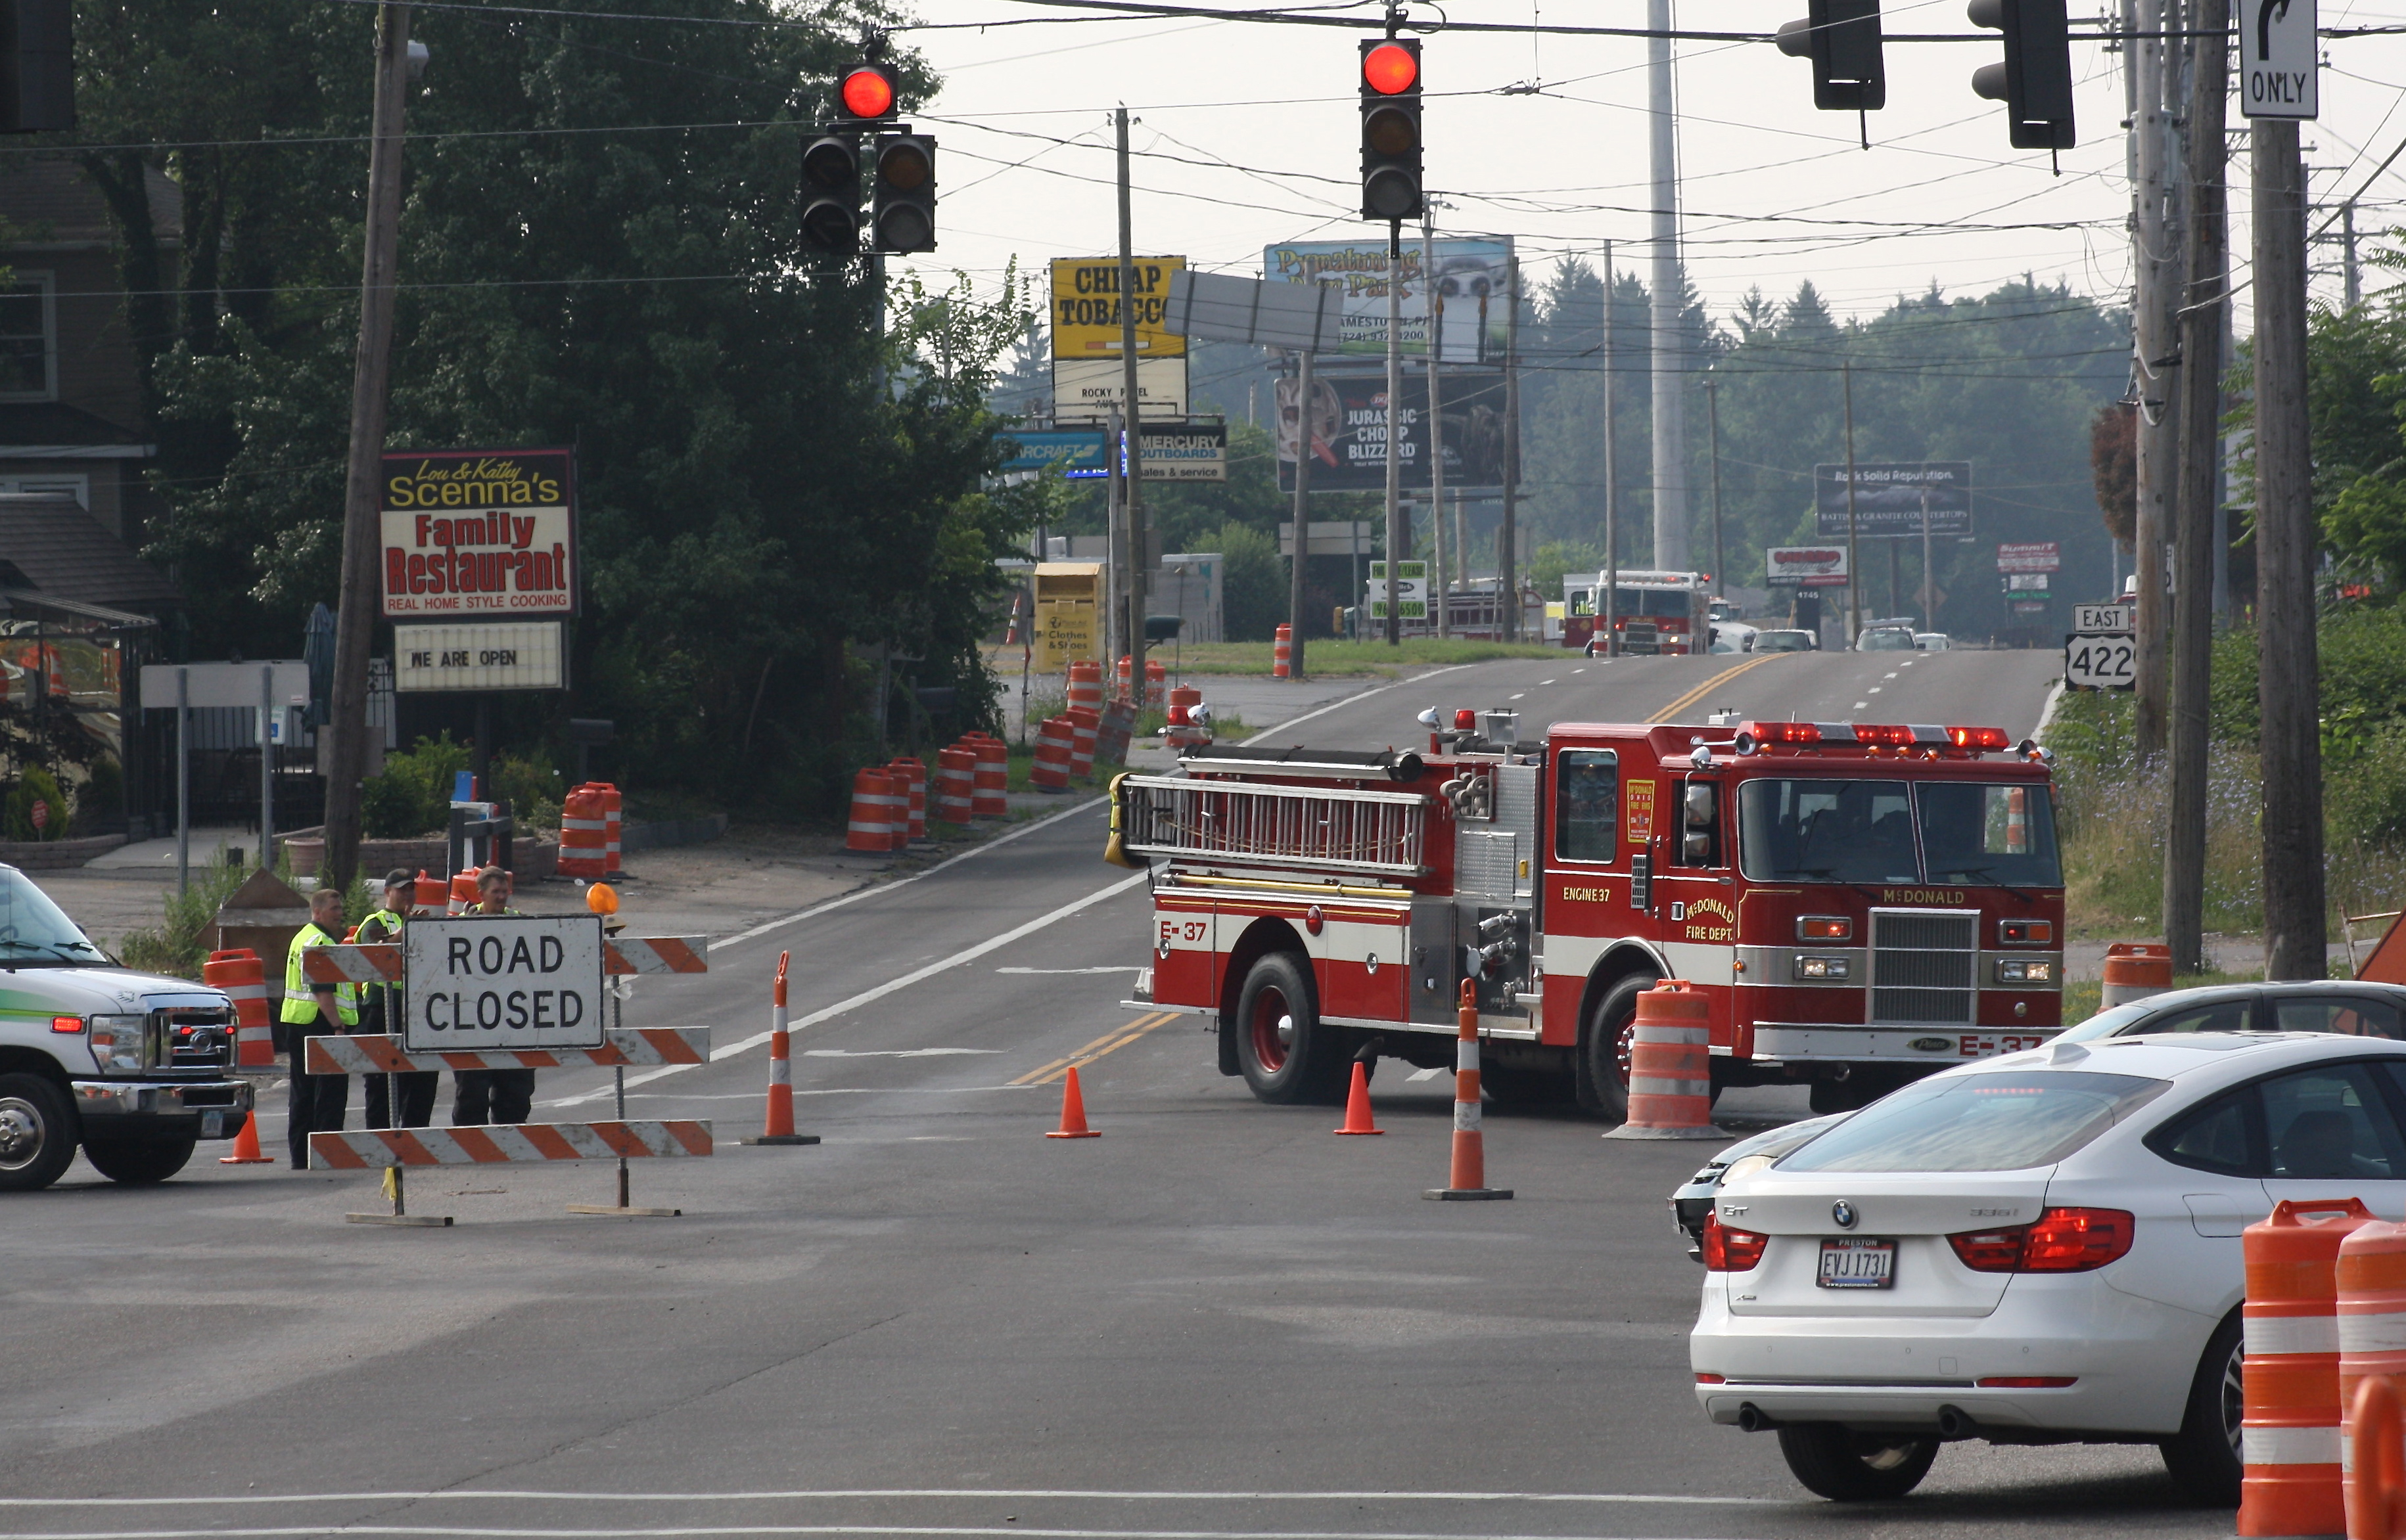 Trucks and signs indicate that no one is able to enter the part  of U.S. Route 422 (north State Street) in Girard near Predator Trucking after an evacuation of the area for an apparent hazardous chemical leak this morning. The road block is at the intersection of U.S. Route 422 and Tibbetts Wick Road. 